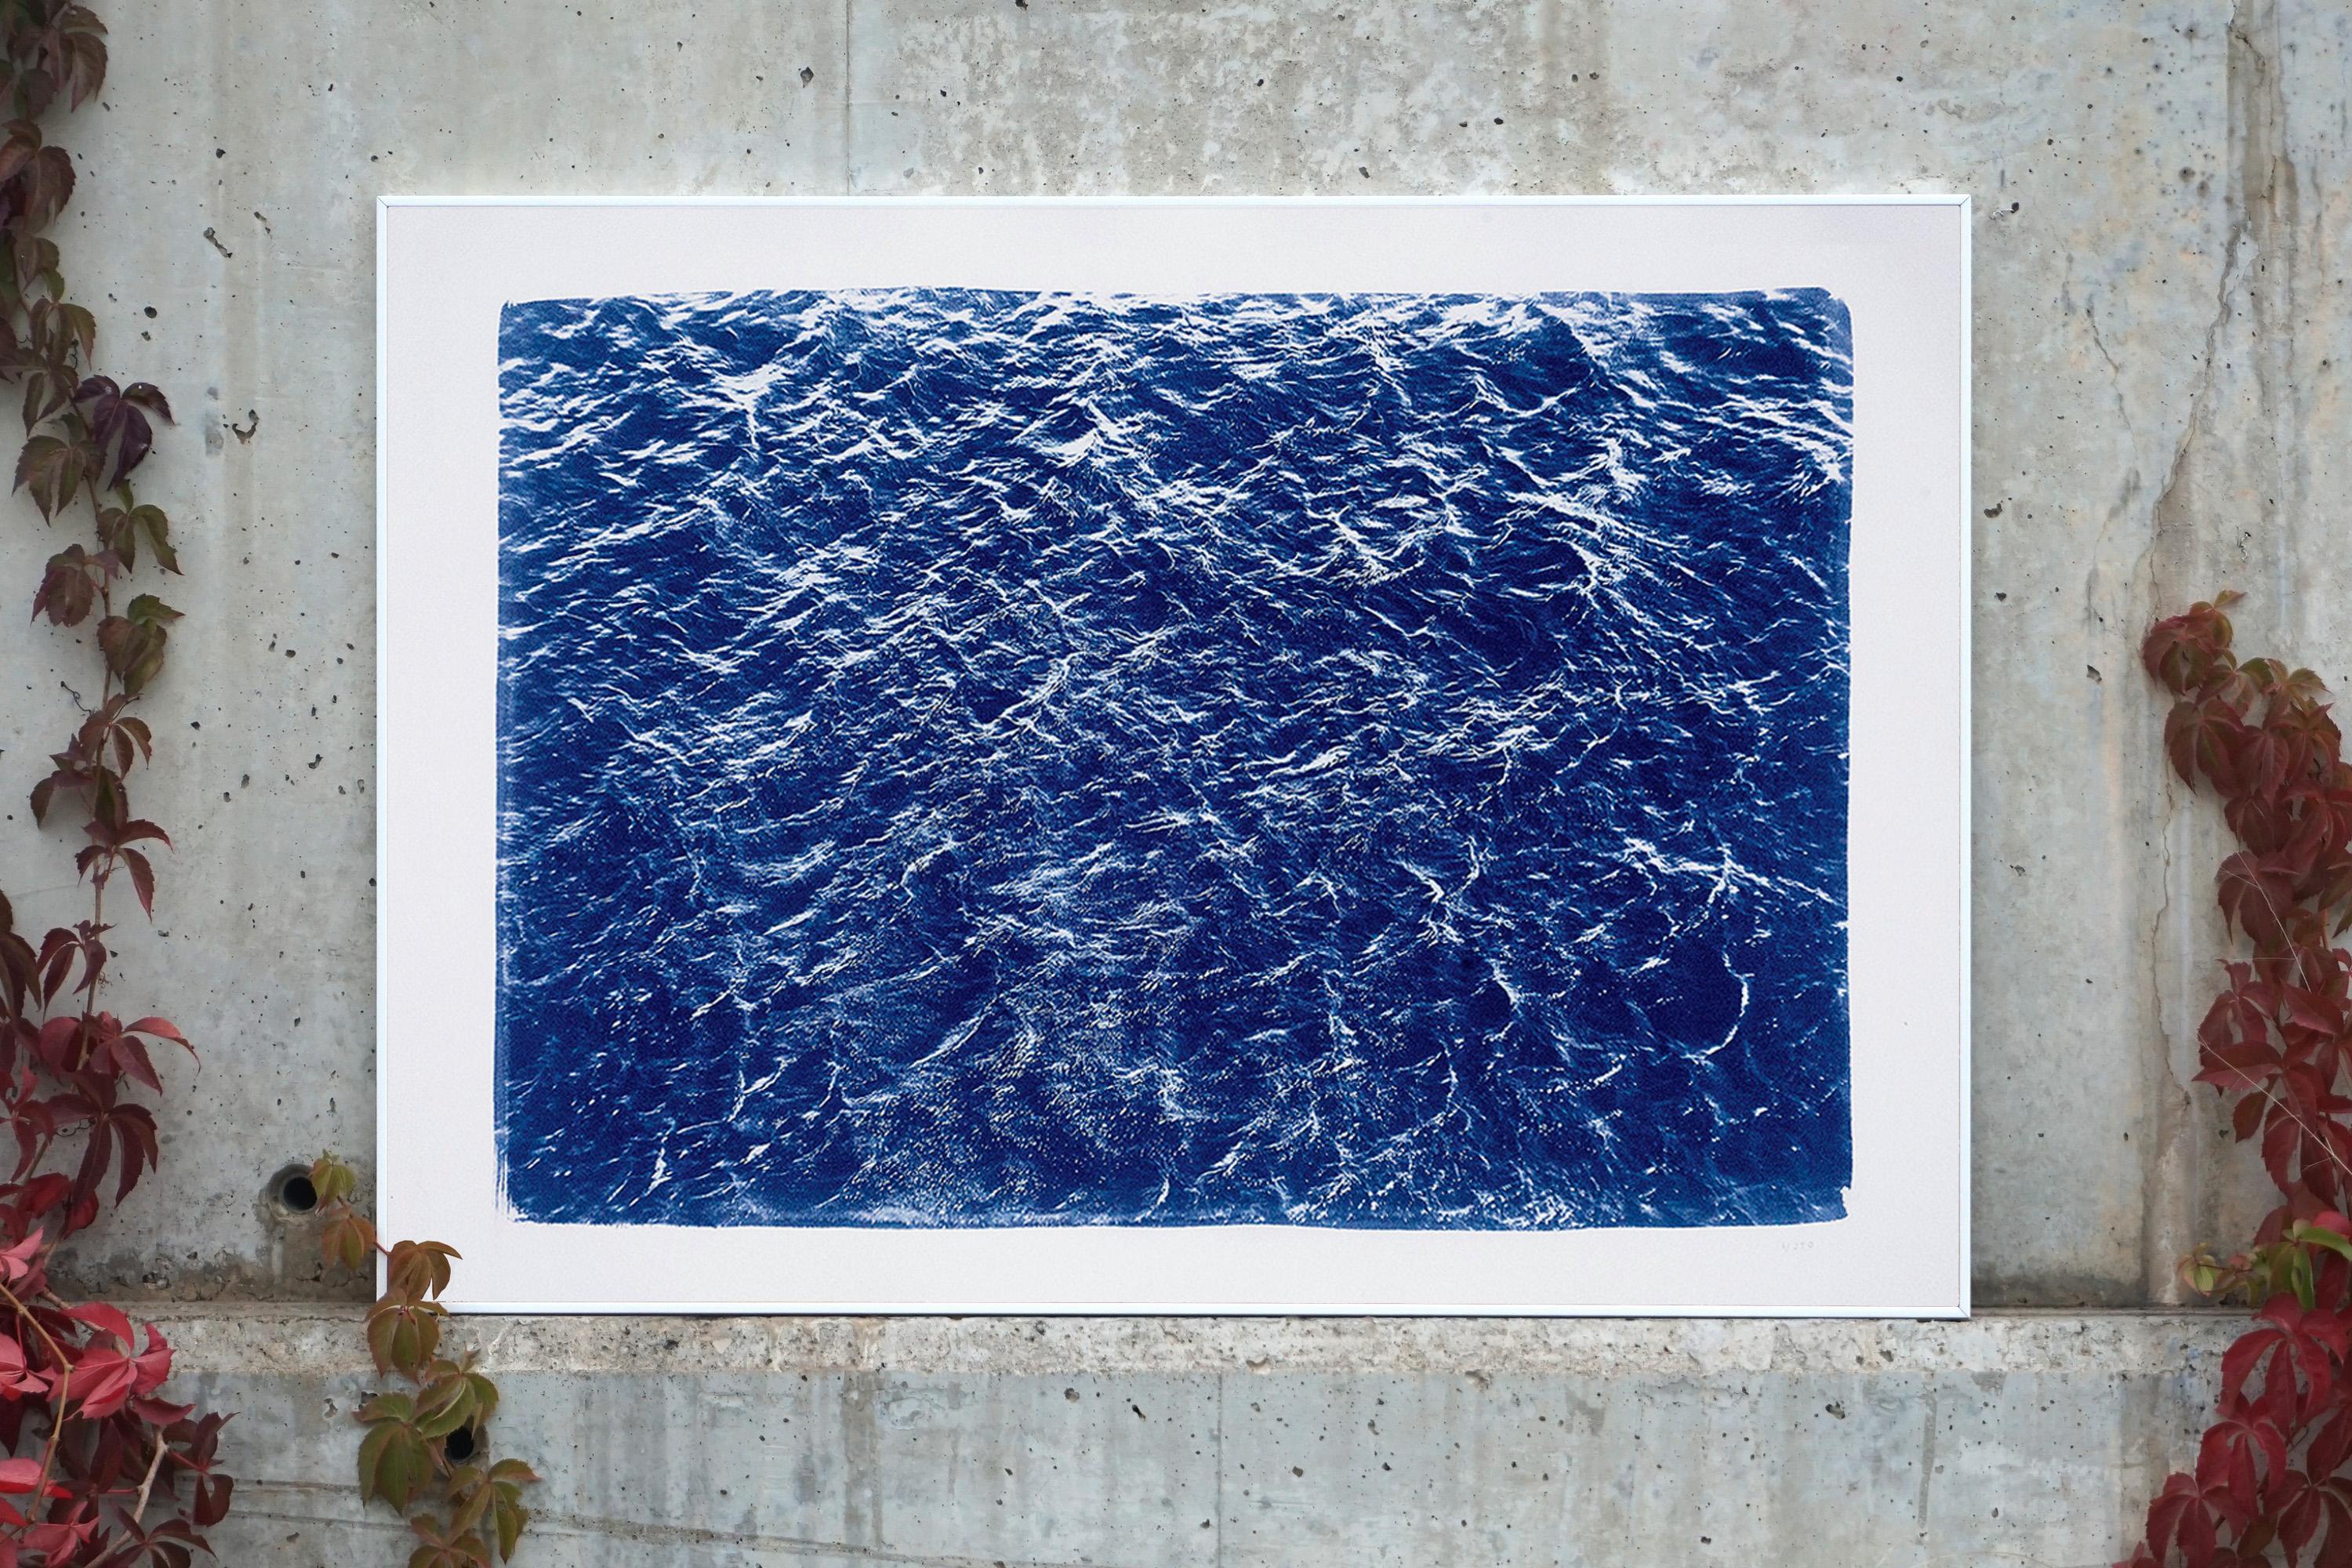 Pacific Ocean Currents, Handmade Cyanotype Seascape in Blue, Waves Landscape  - Purple Abstract Drawing by Kind of Cyan